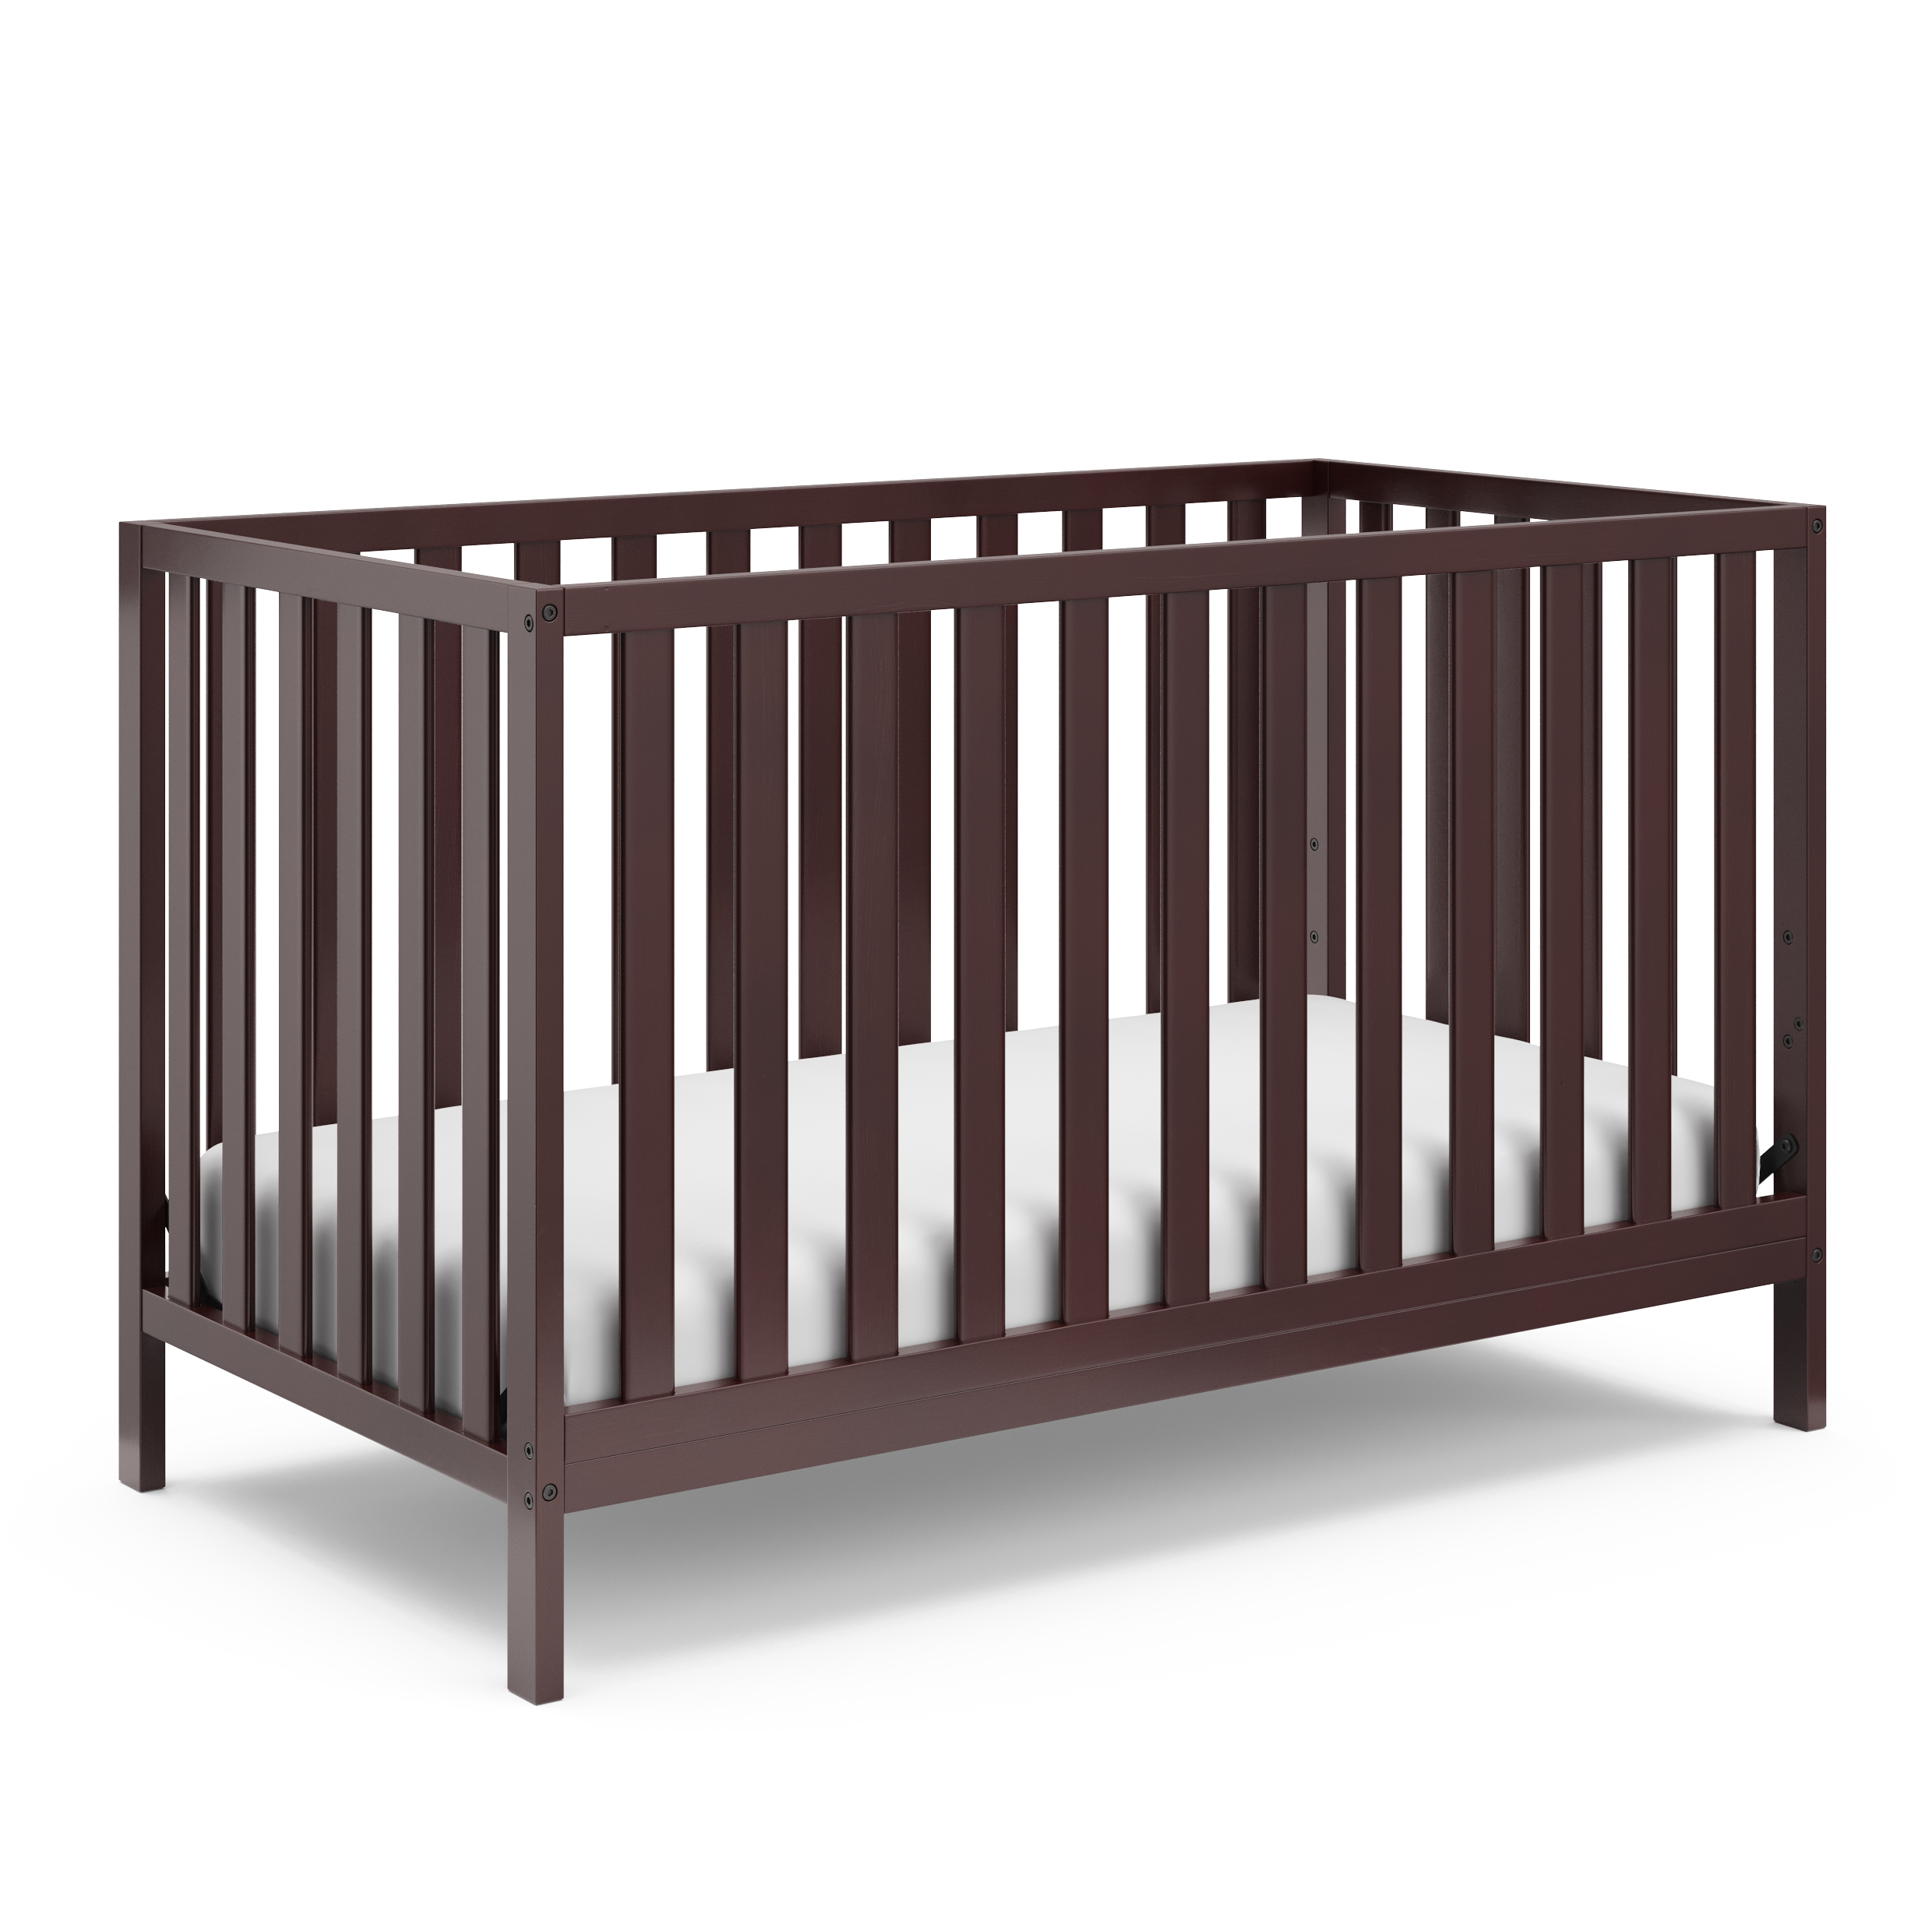 Storkcraft Sunset 4-in-1 Convertible Baby Crib, Espresso - image 1 of 8